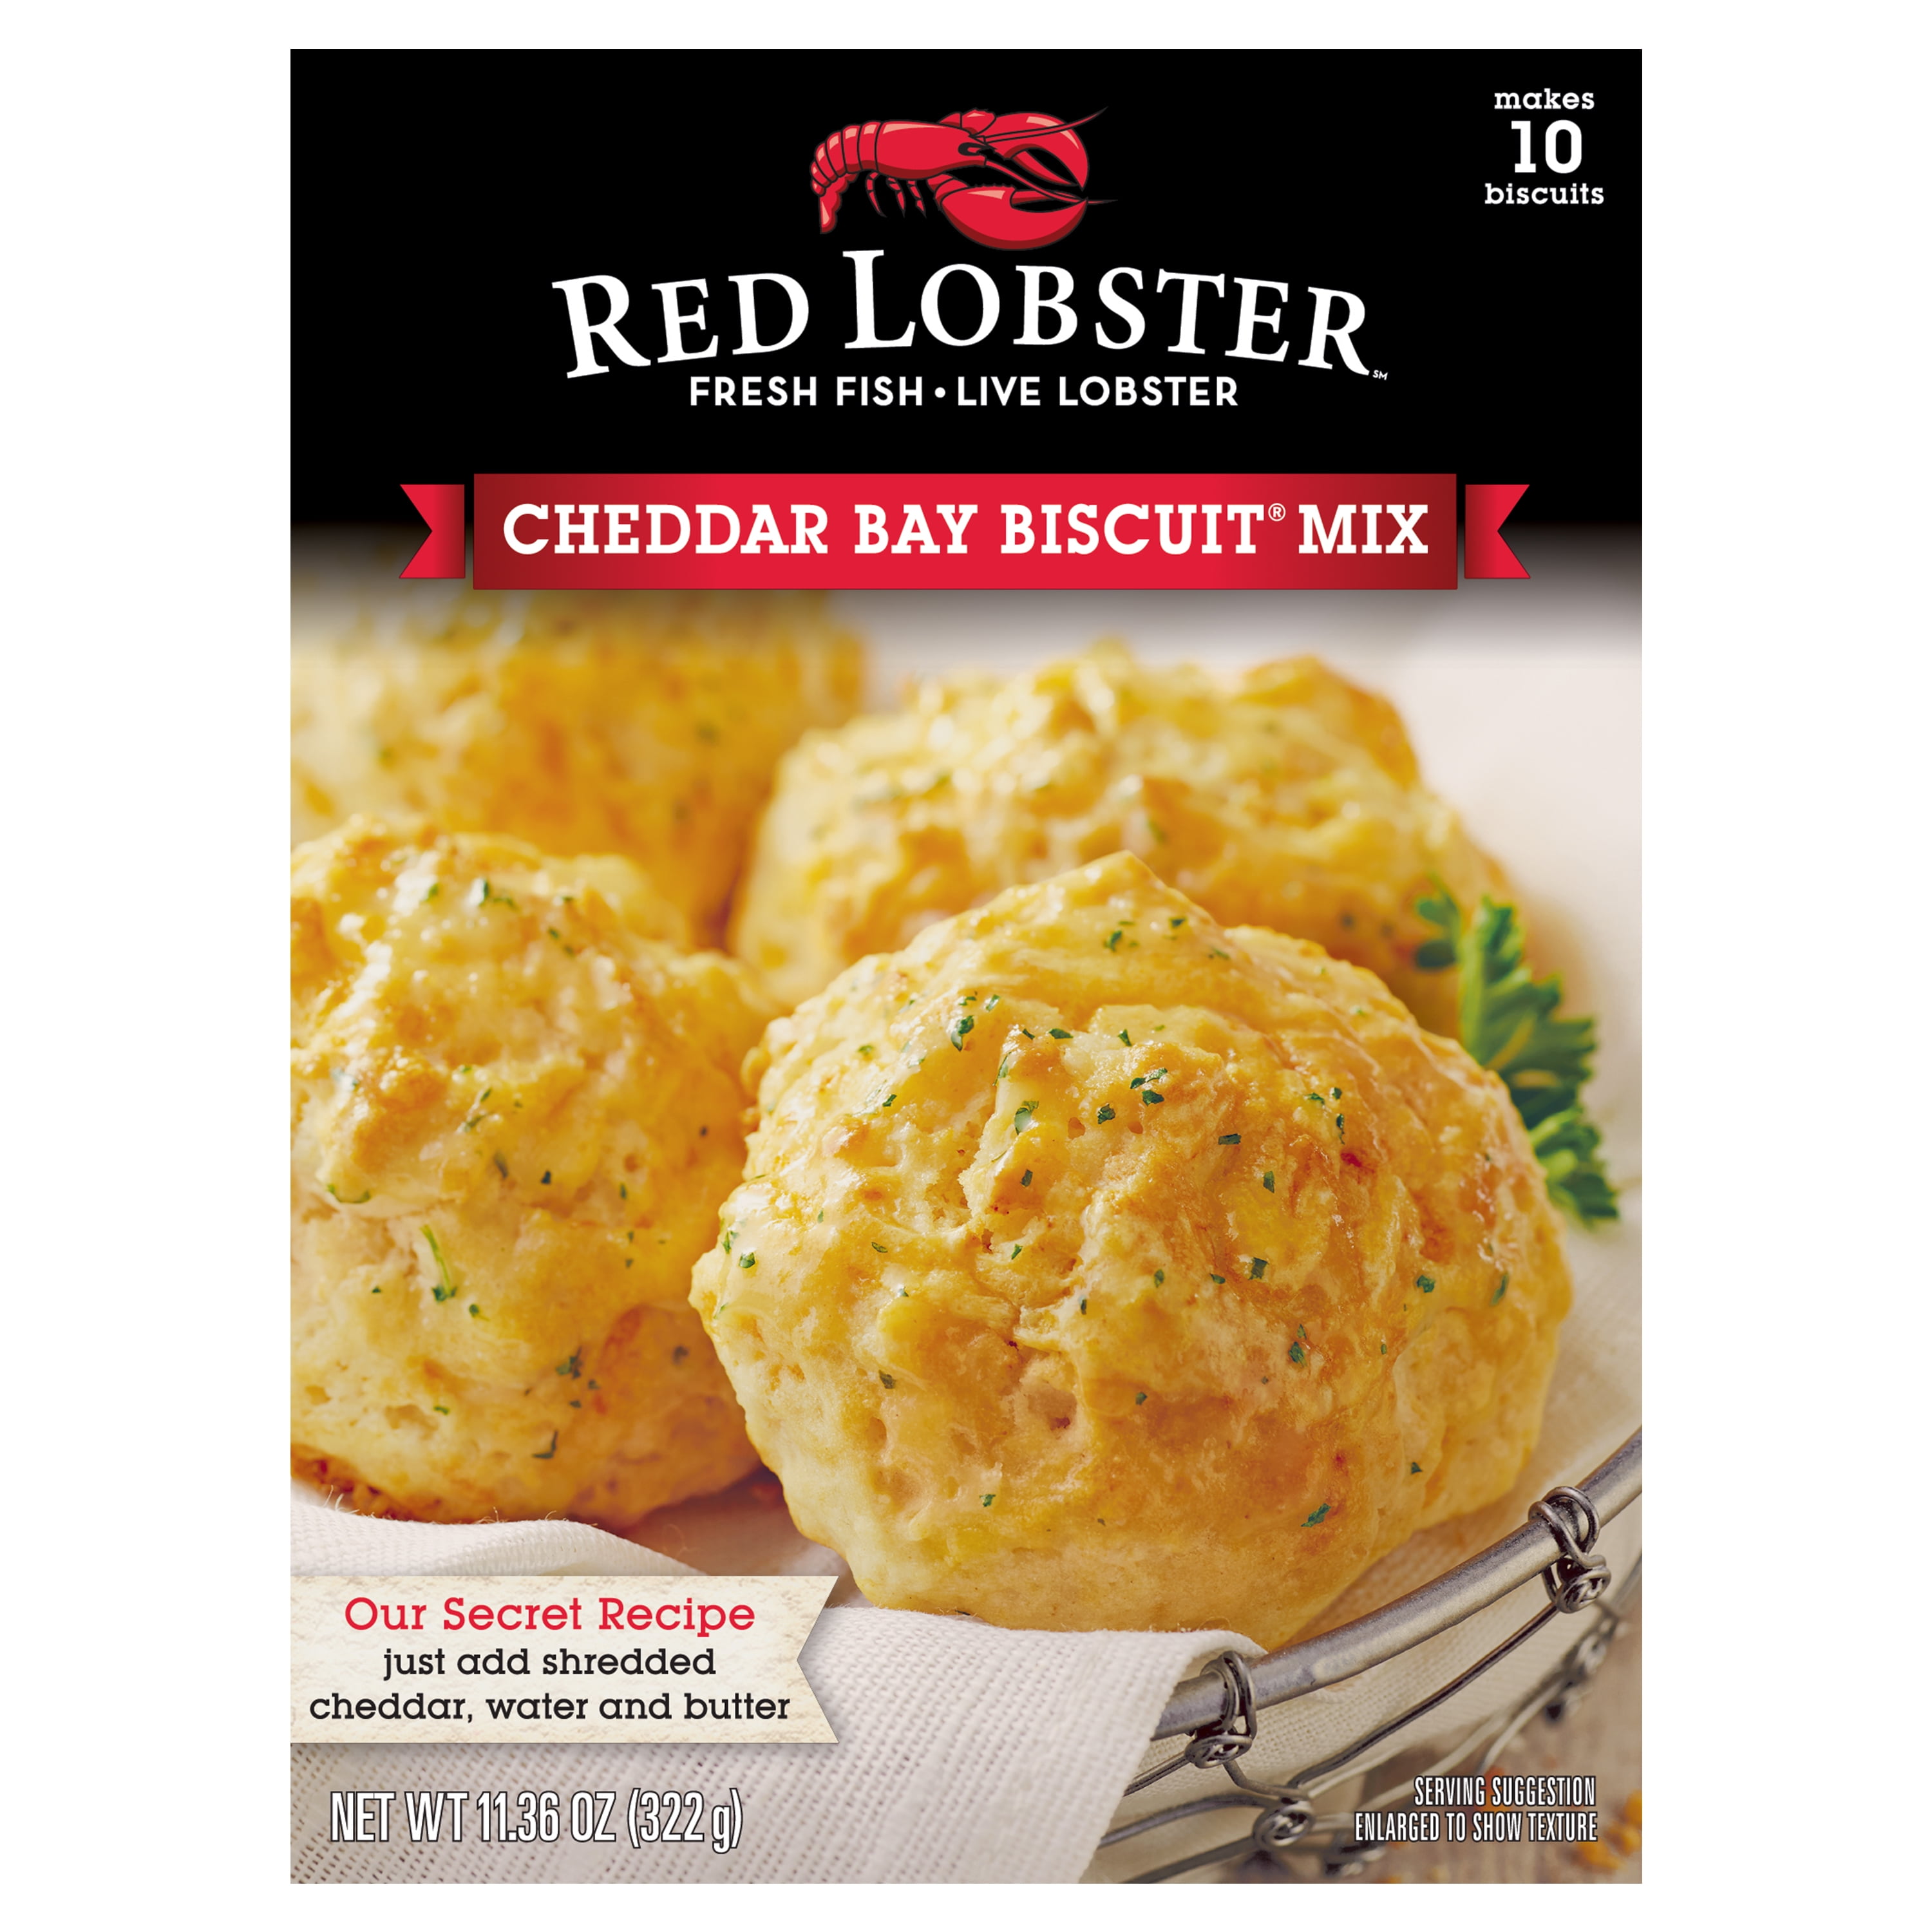 Red Lobster Cheese Biscuits with Homemade Biscuit Mix